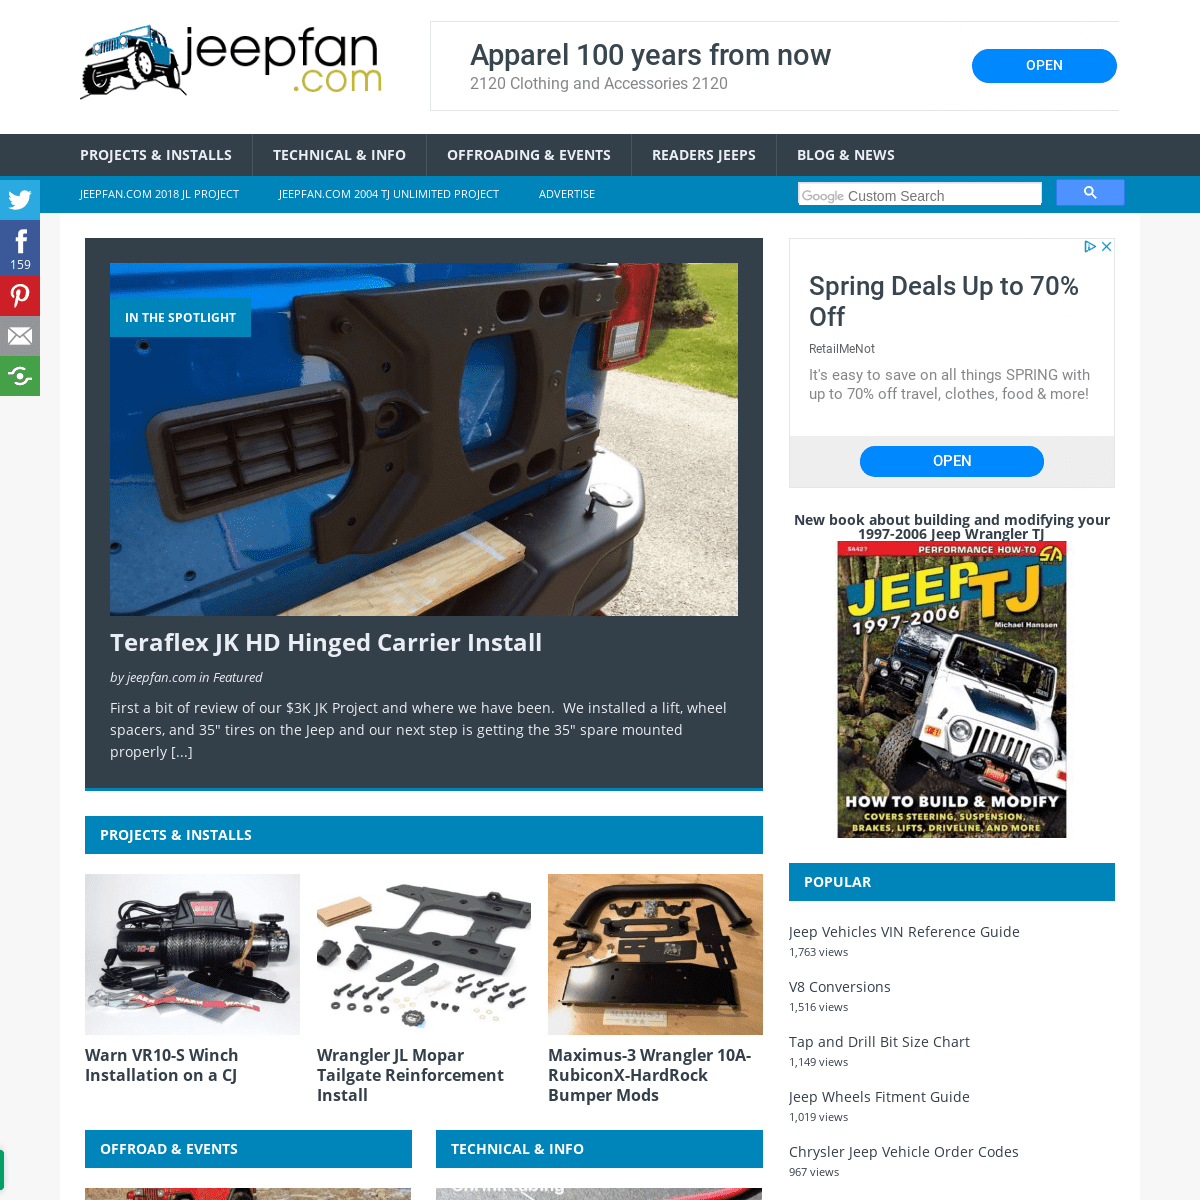 A complete backup of jeepfan.com